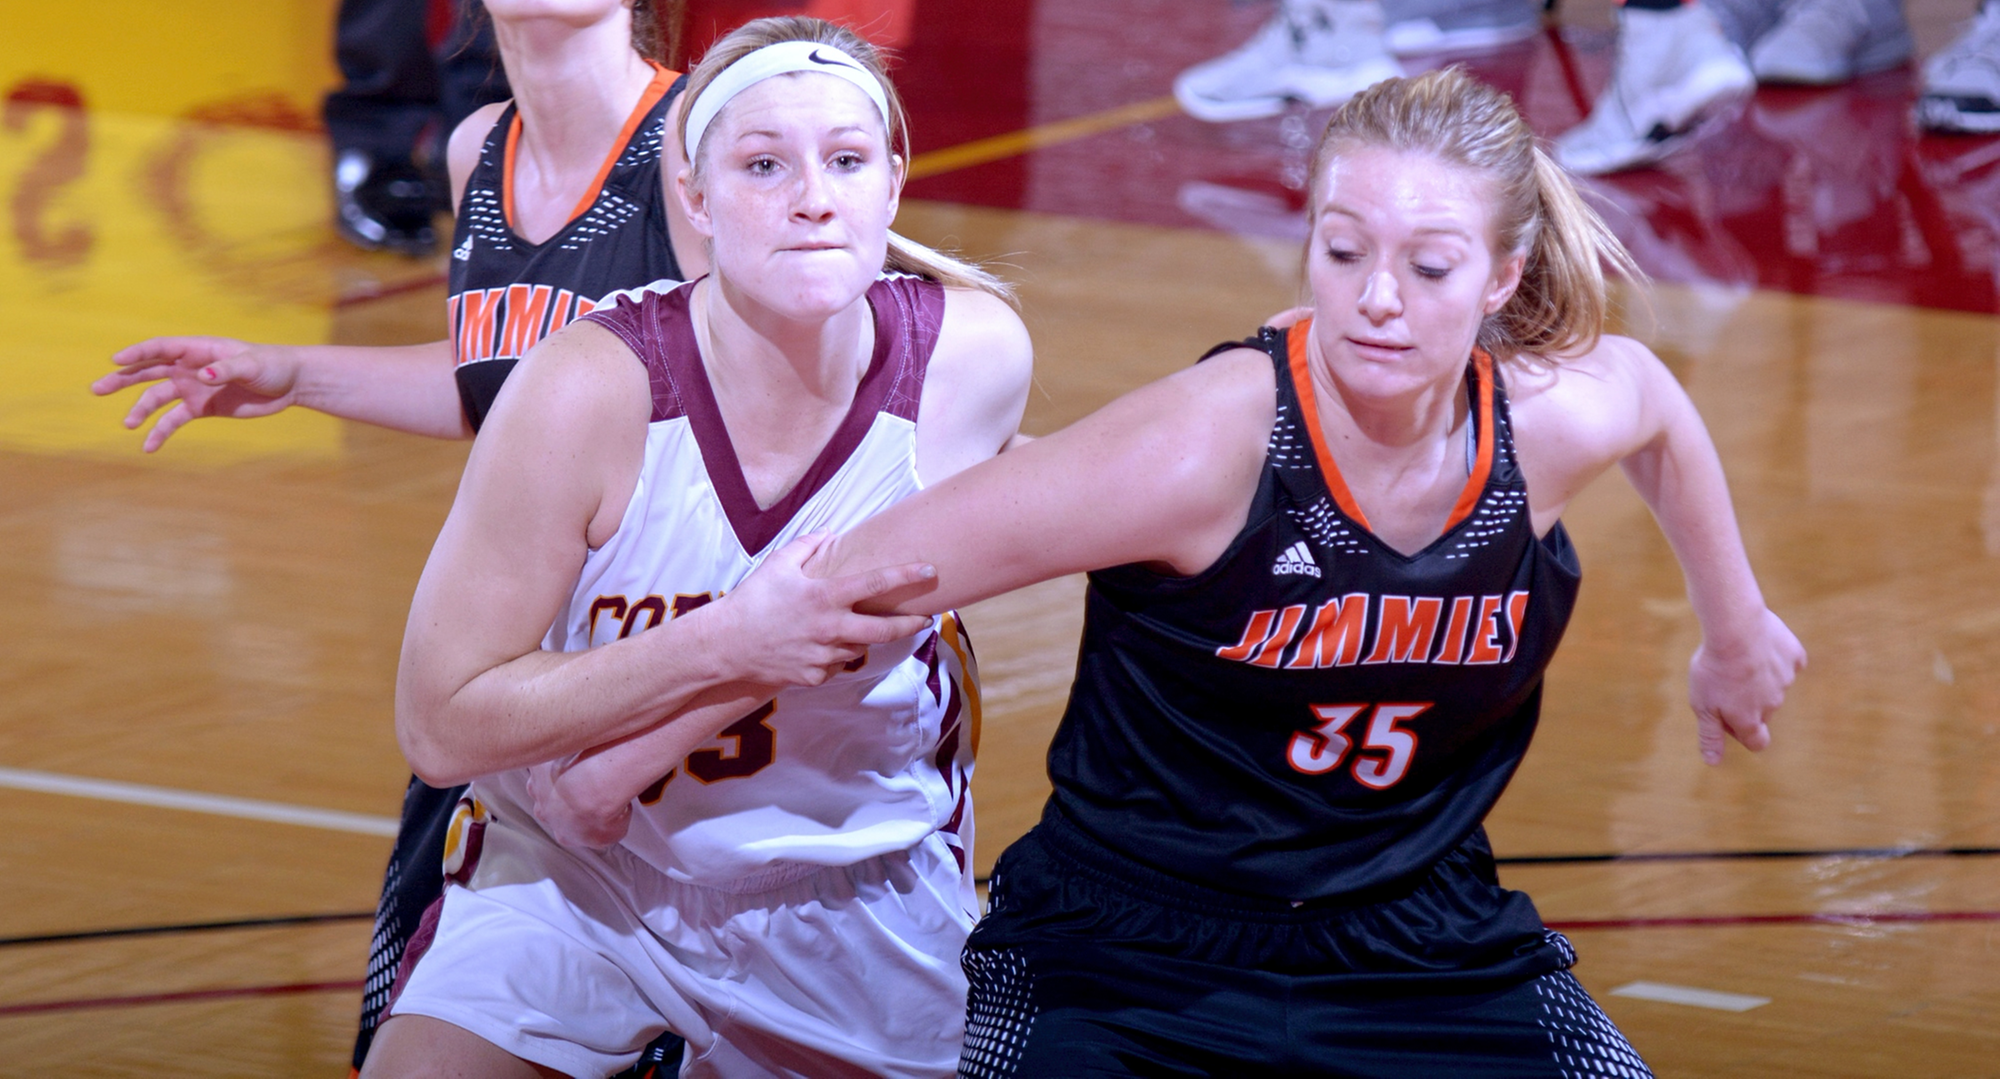 Senior Jenna Januschka scored 15 points and had seven rebounds in the Cobbers' game with Elmhurst. Januschka was named to the Rocky Mountain Classic All-Tournament Team.